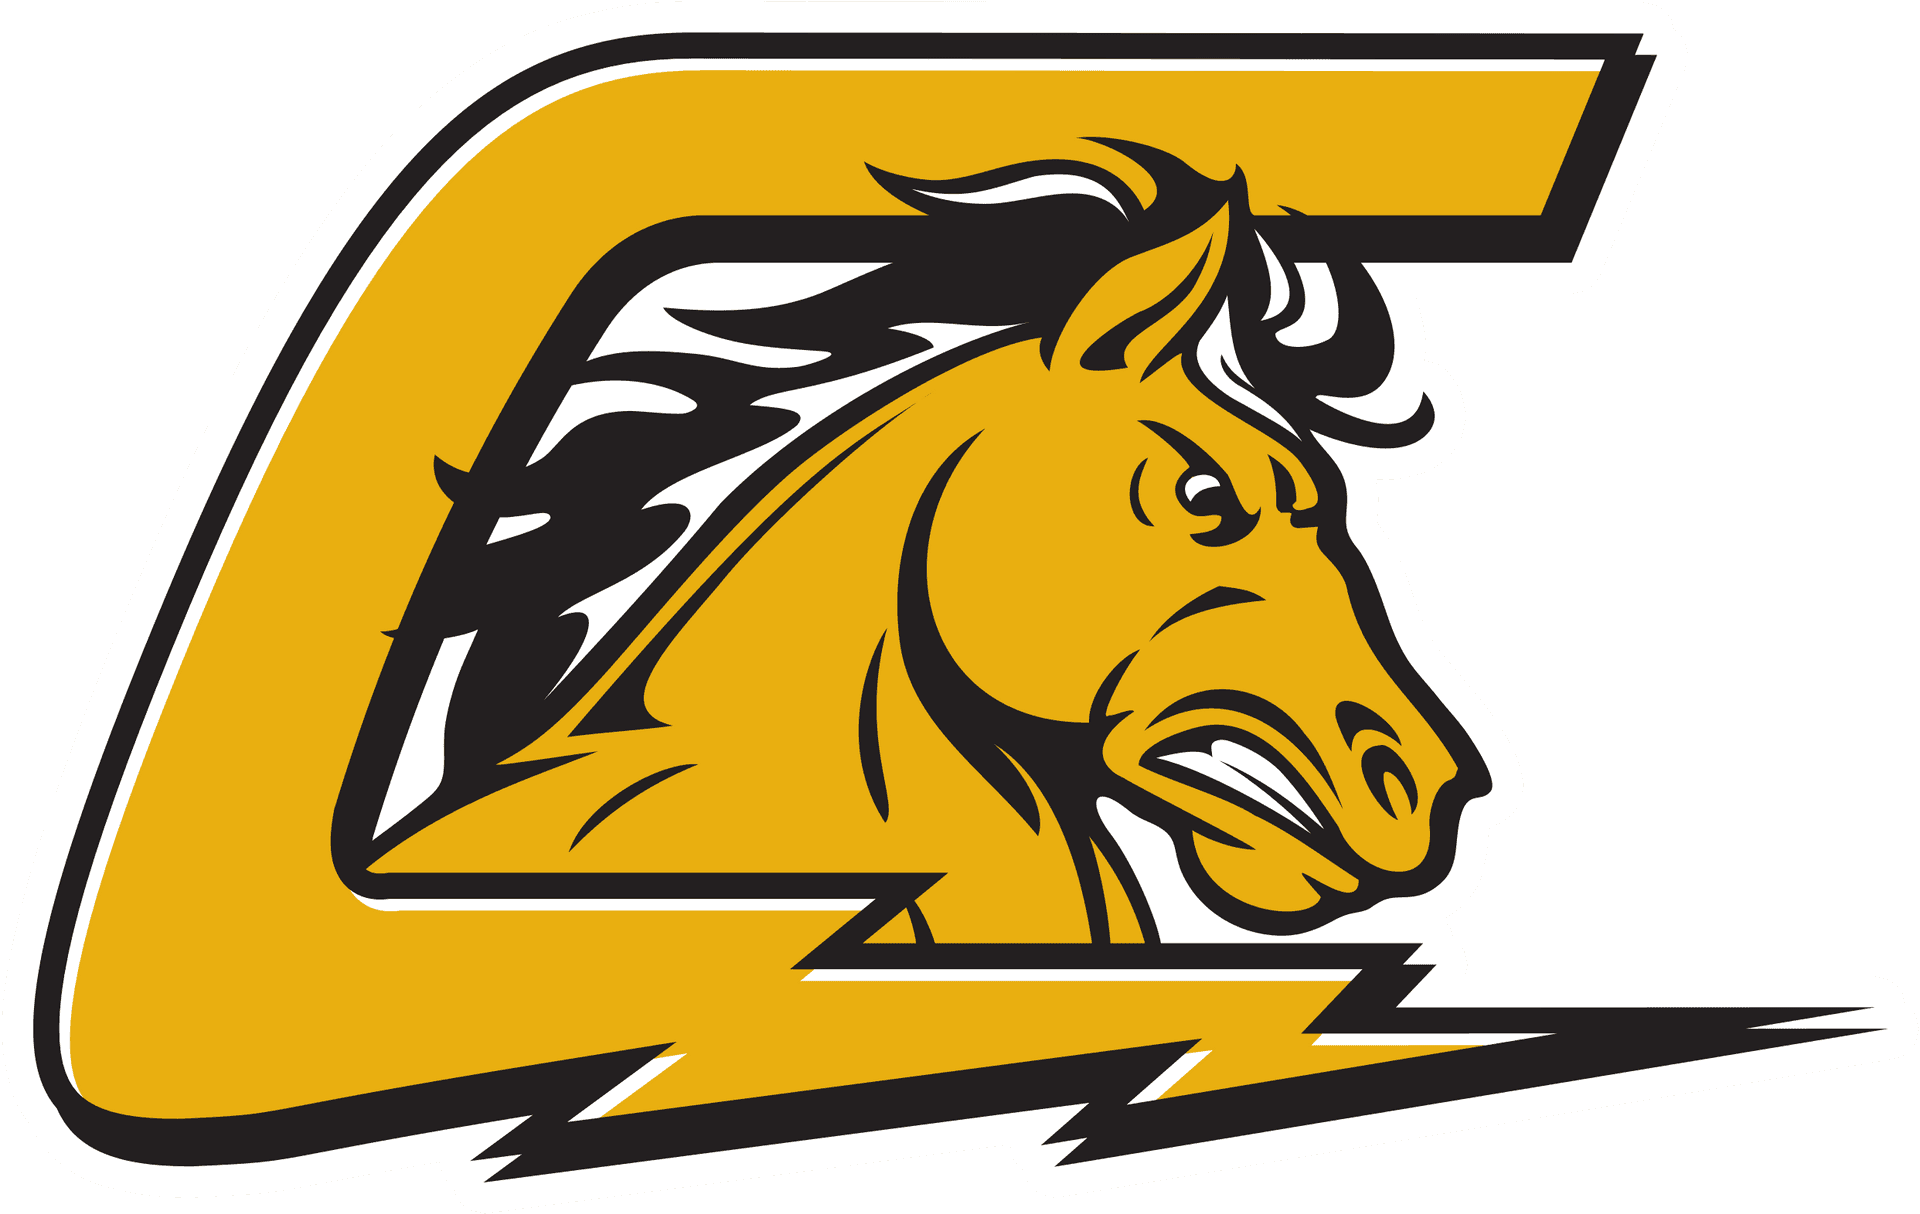 Chargers Horse Logo PNG